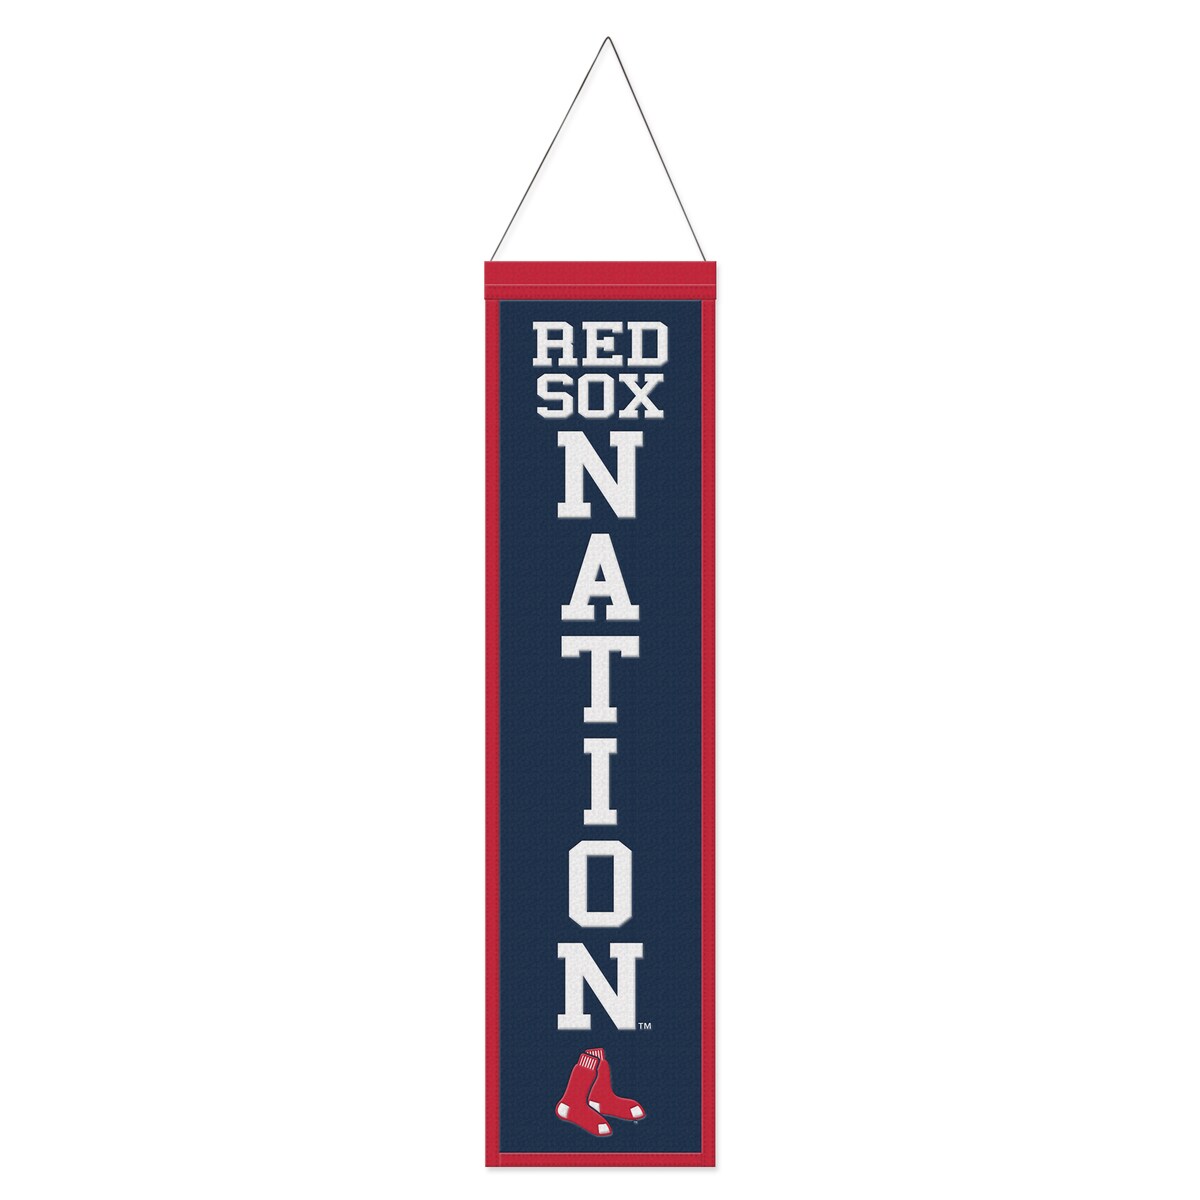 Display your Boston Red Sox fandom tastefully by adding this WinCraft Wool Banner. Featuring the team's slogan and vibrant graphics, this banner lets everyone know who you rep every game day. The ready-to-hang feature makes it quick and easy to place wherever you feel the Boston Red Sox vibes are needed.Measures approx. 8'' x 32''Embroidered fabric appliquesOfficially licensedBrand: WinCraftSingle-sided designMaterial: 100% WoolReady to hangImportedWipe clean with a damp clothEmbroidered graphics